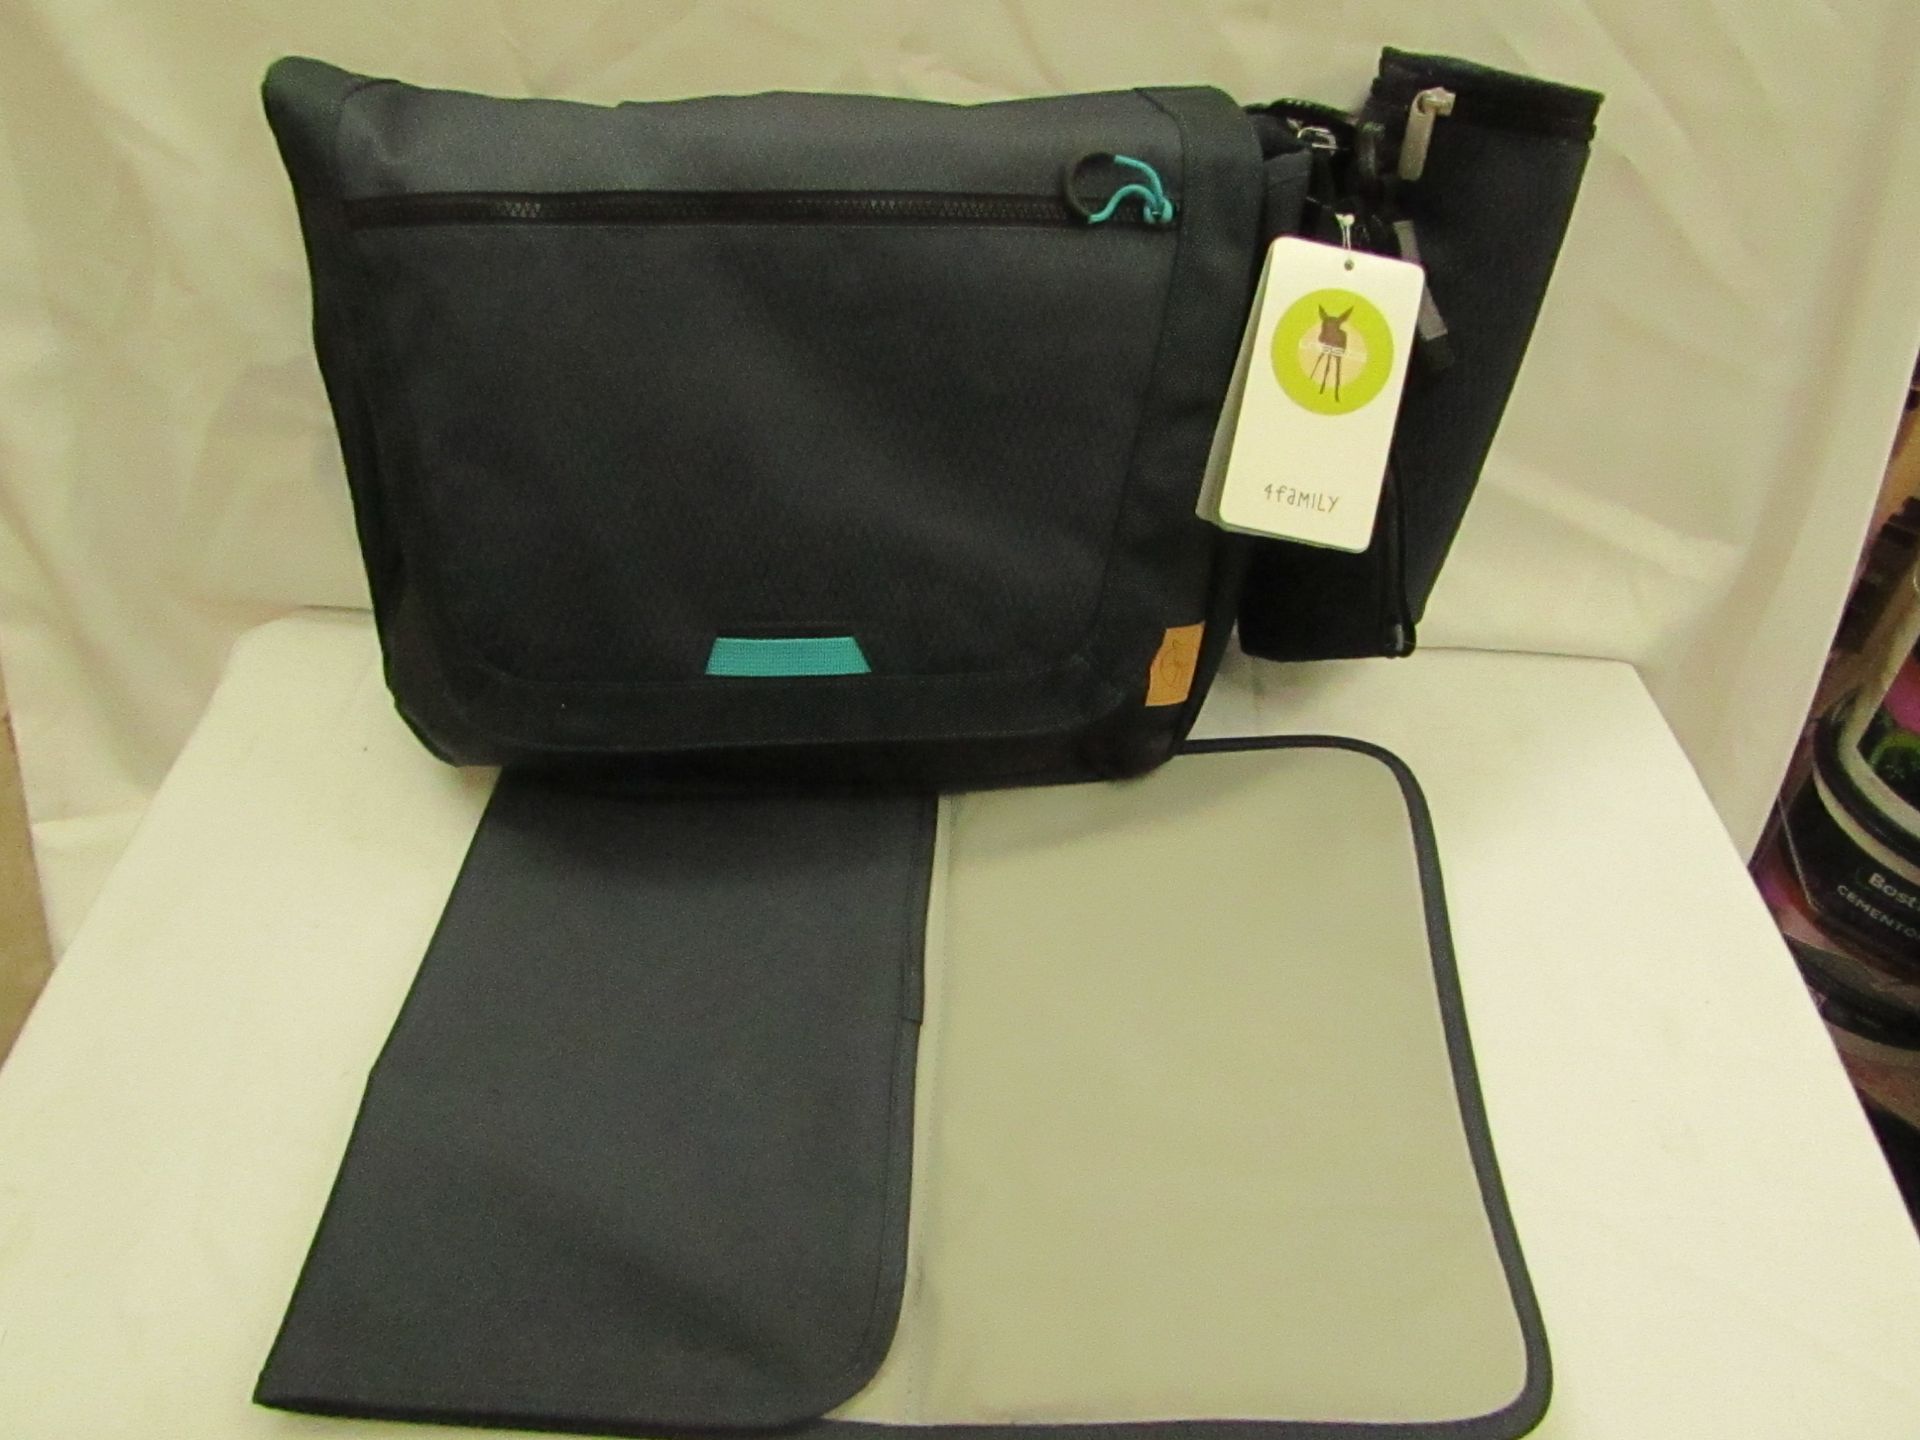 1x Lassig - Mens Sporty Messenger Bag - New With Original Tags & Packaged.